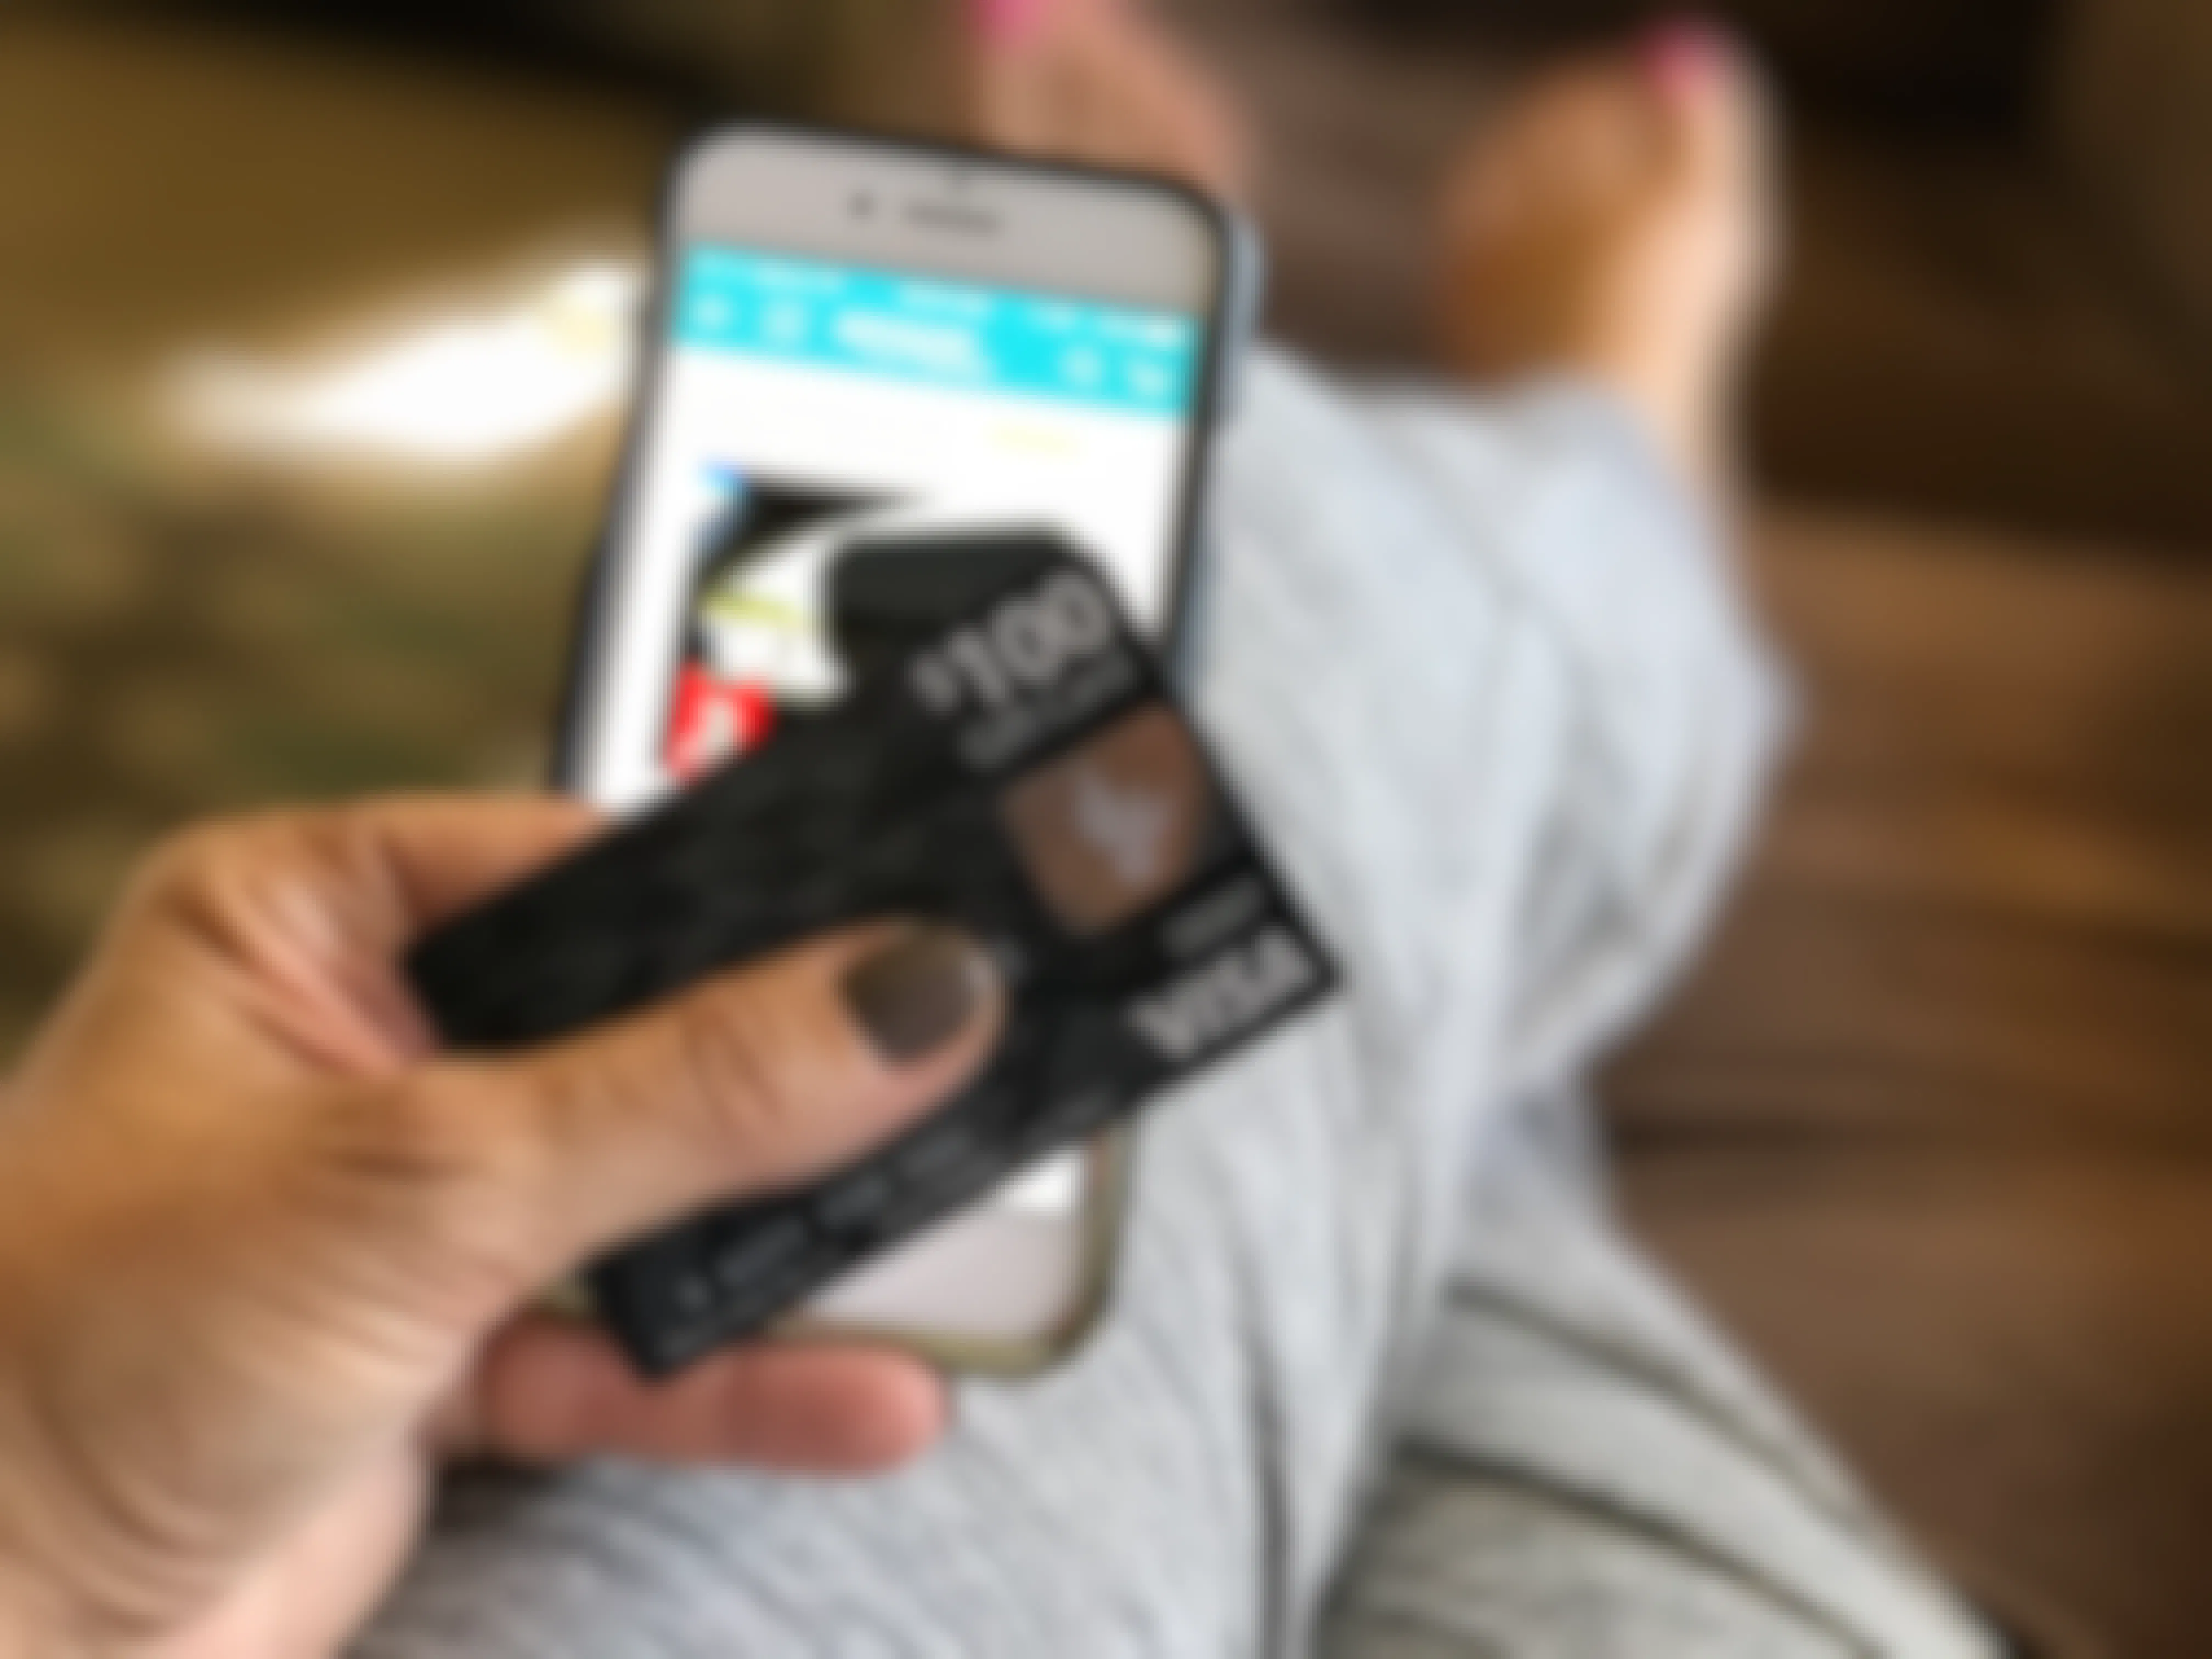 A person holding prepaid visa gift card next to phone with amazon app open